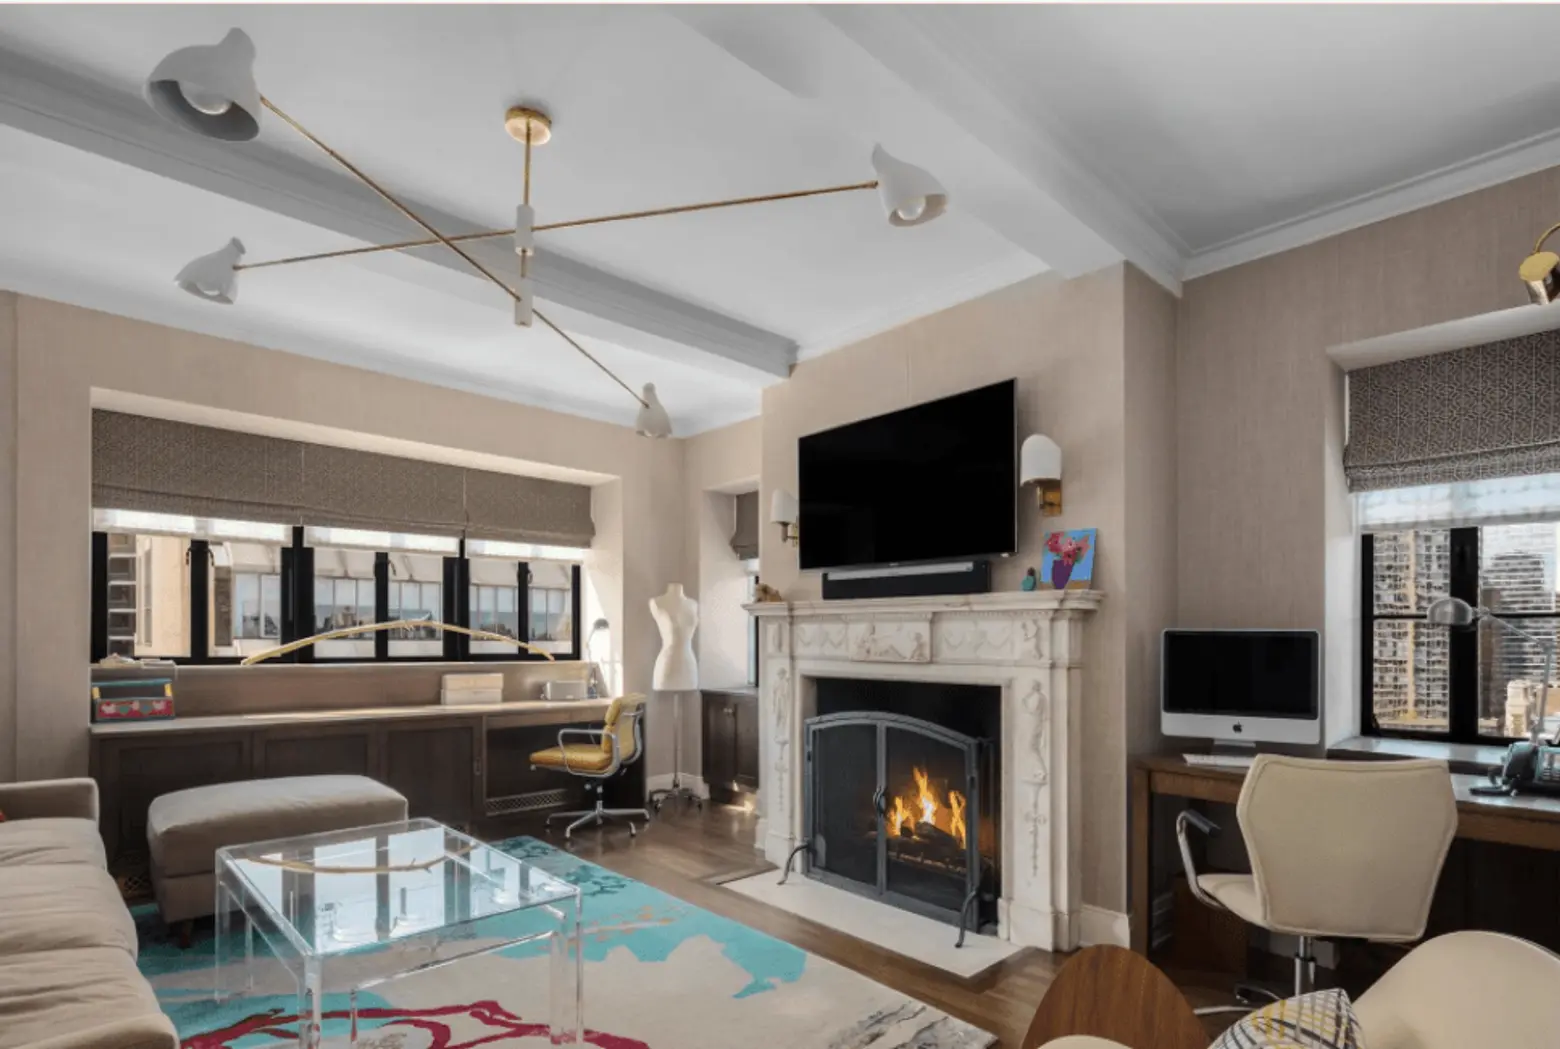 1 west 67th street, hotel des artistes, co-ops, cool listings